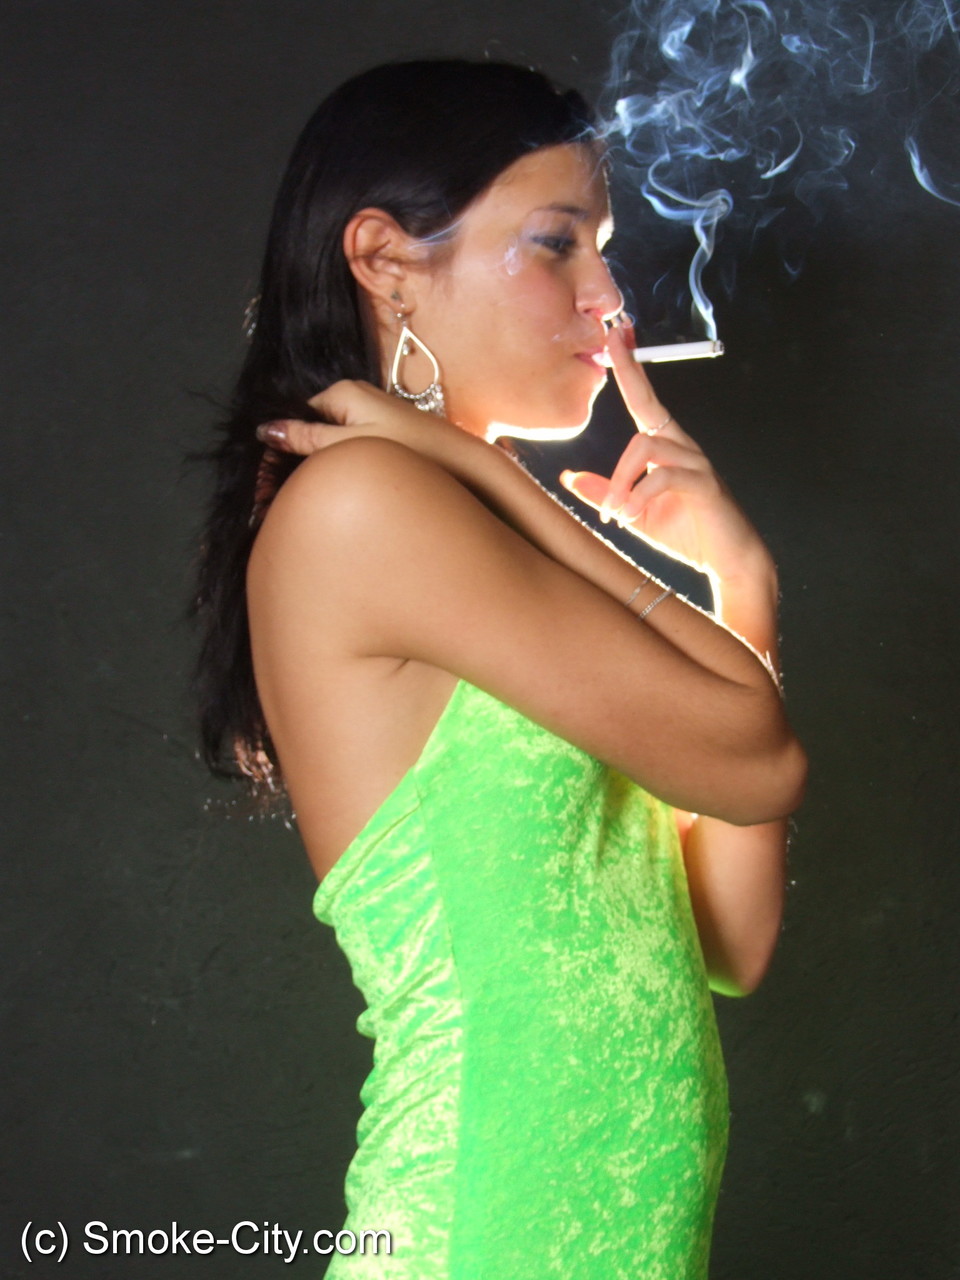 Dark haired teen wears a lime dress and pointy heels while smoking photo porno #426507740